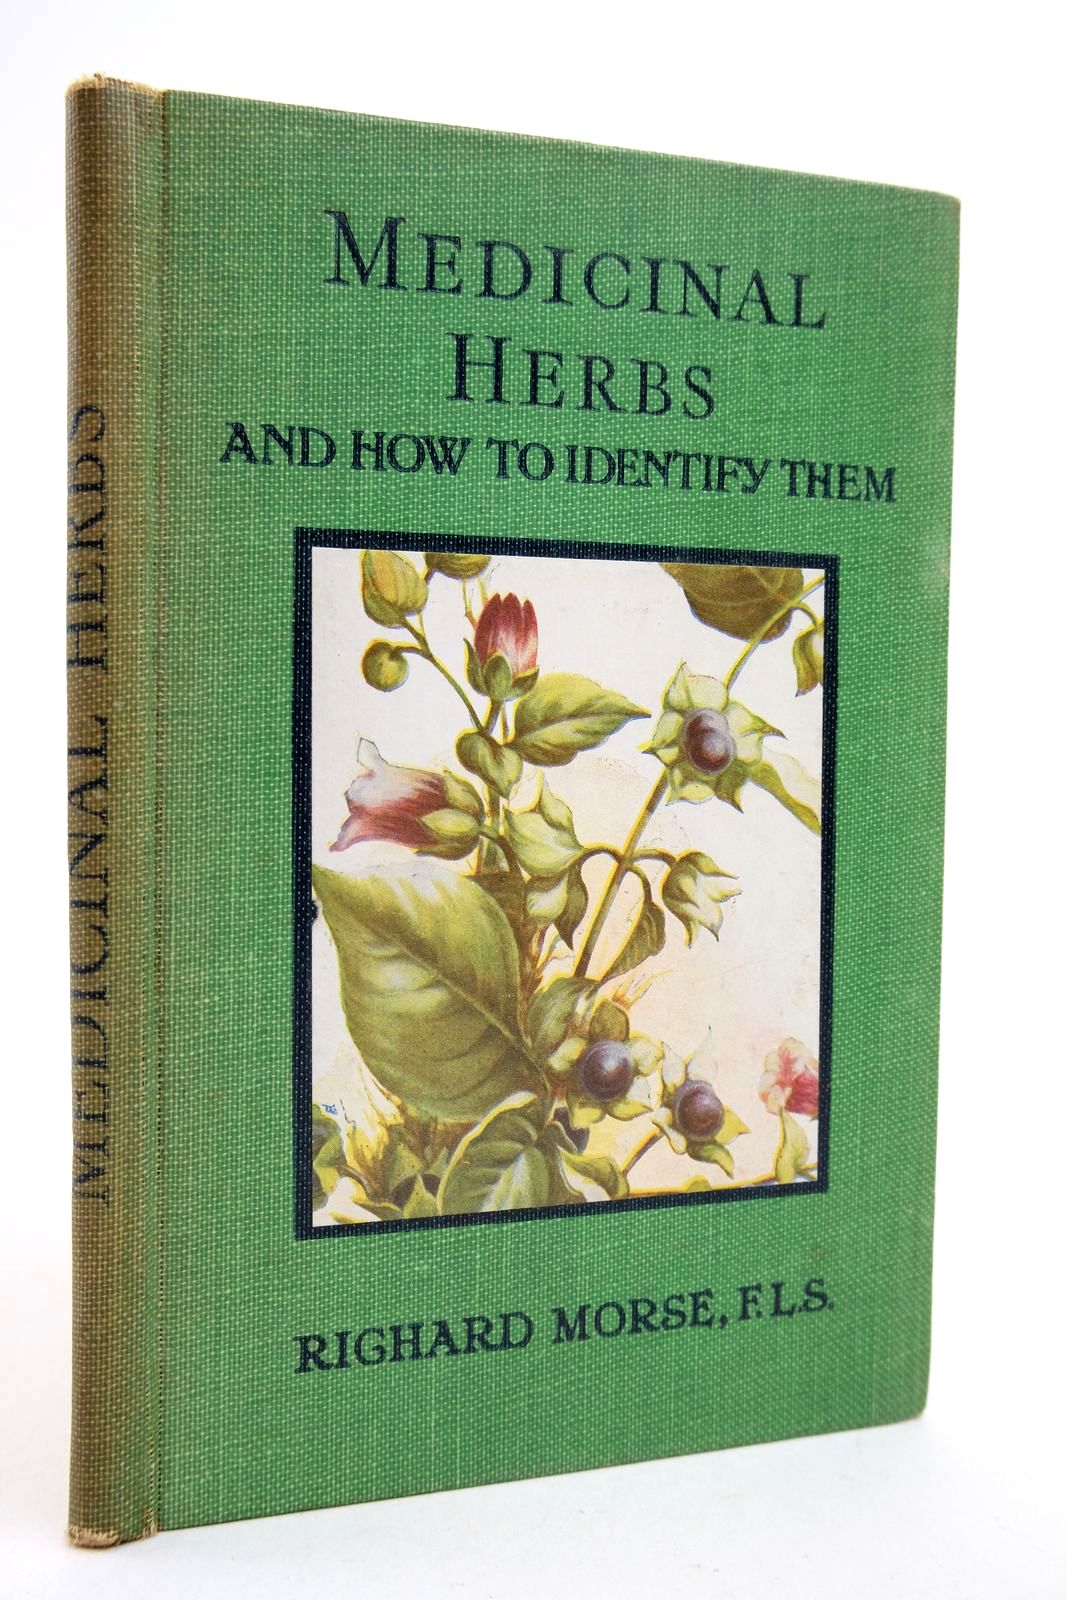 Photo of MEDICINAL HERBS AND HOW TO IDENTIFY THEM written by Morse, Richard illustrated by Wood, Phoebe Lawson published by The Epworth Press (STOCK CODE: 2140660)  for sale by Stella & Rose's Books